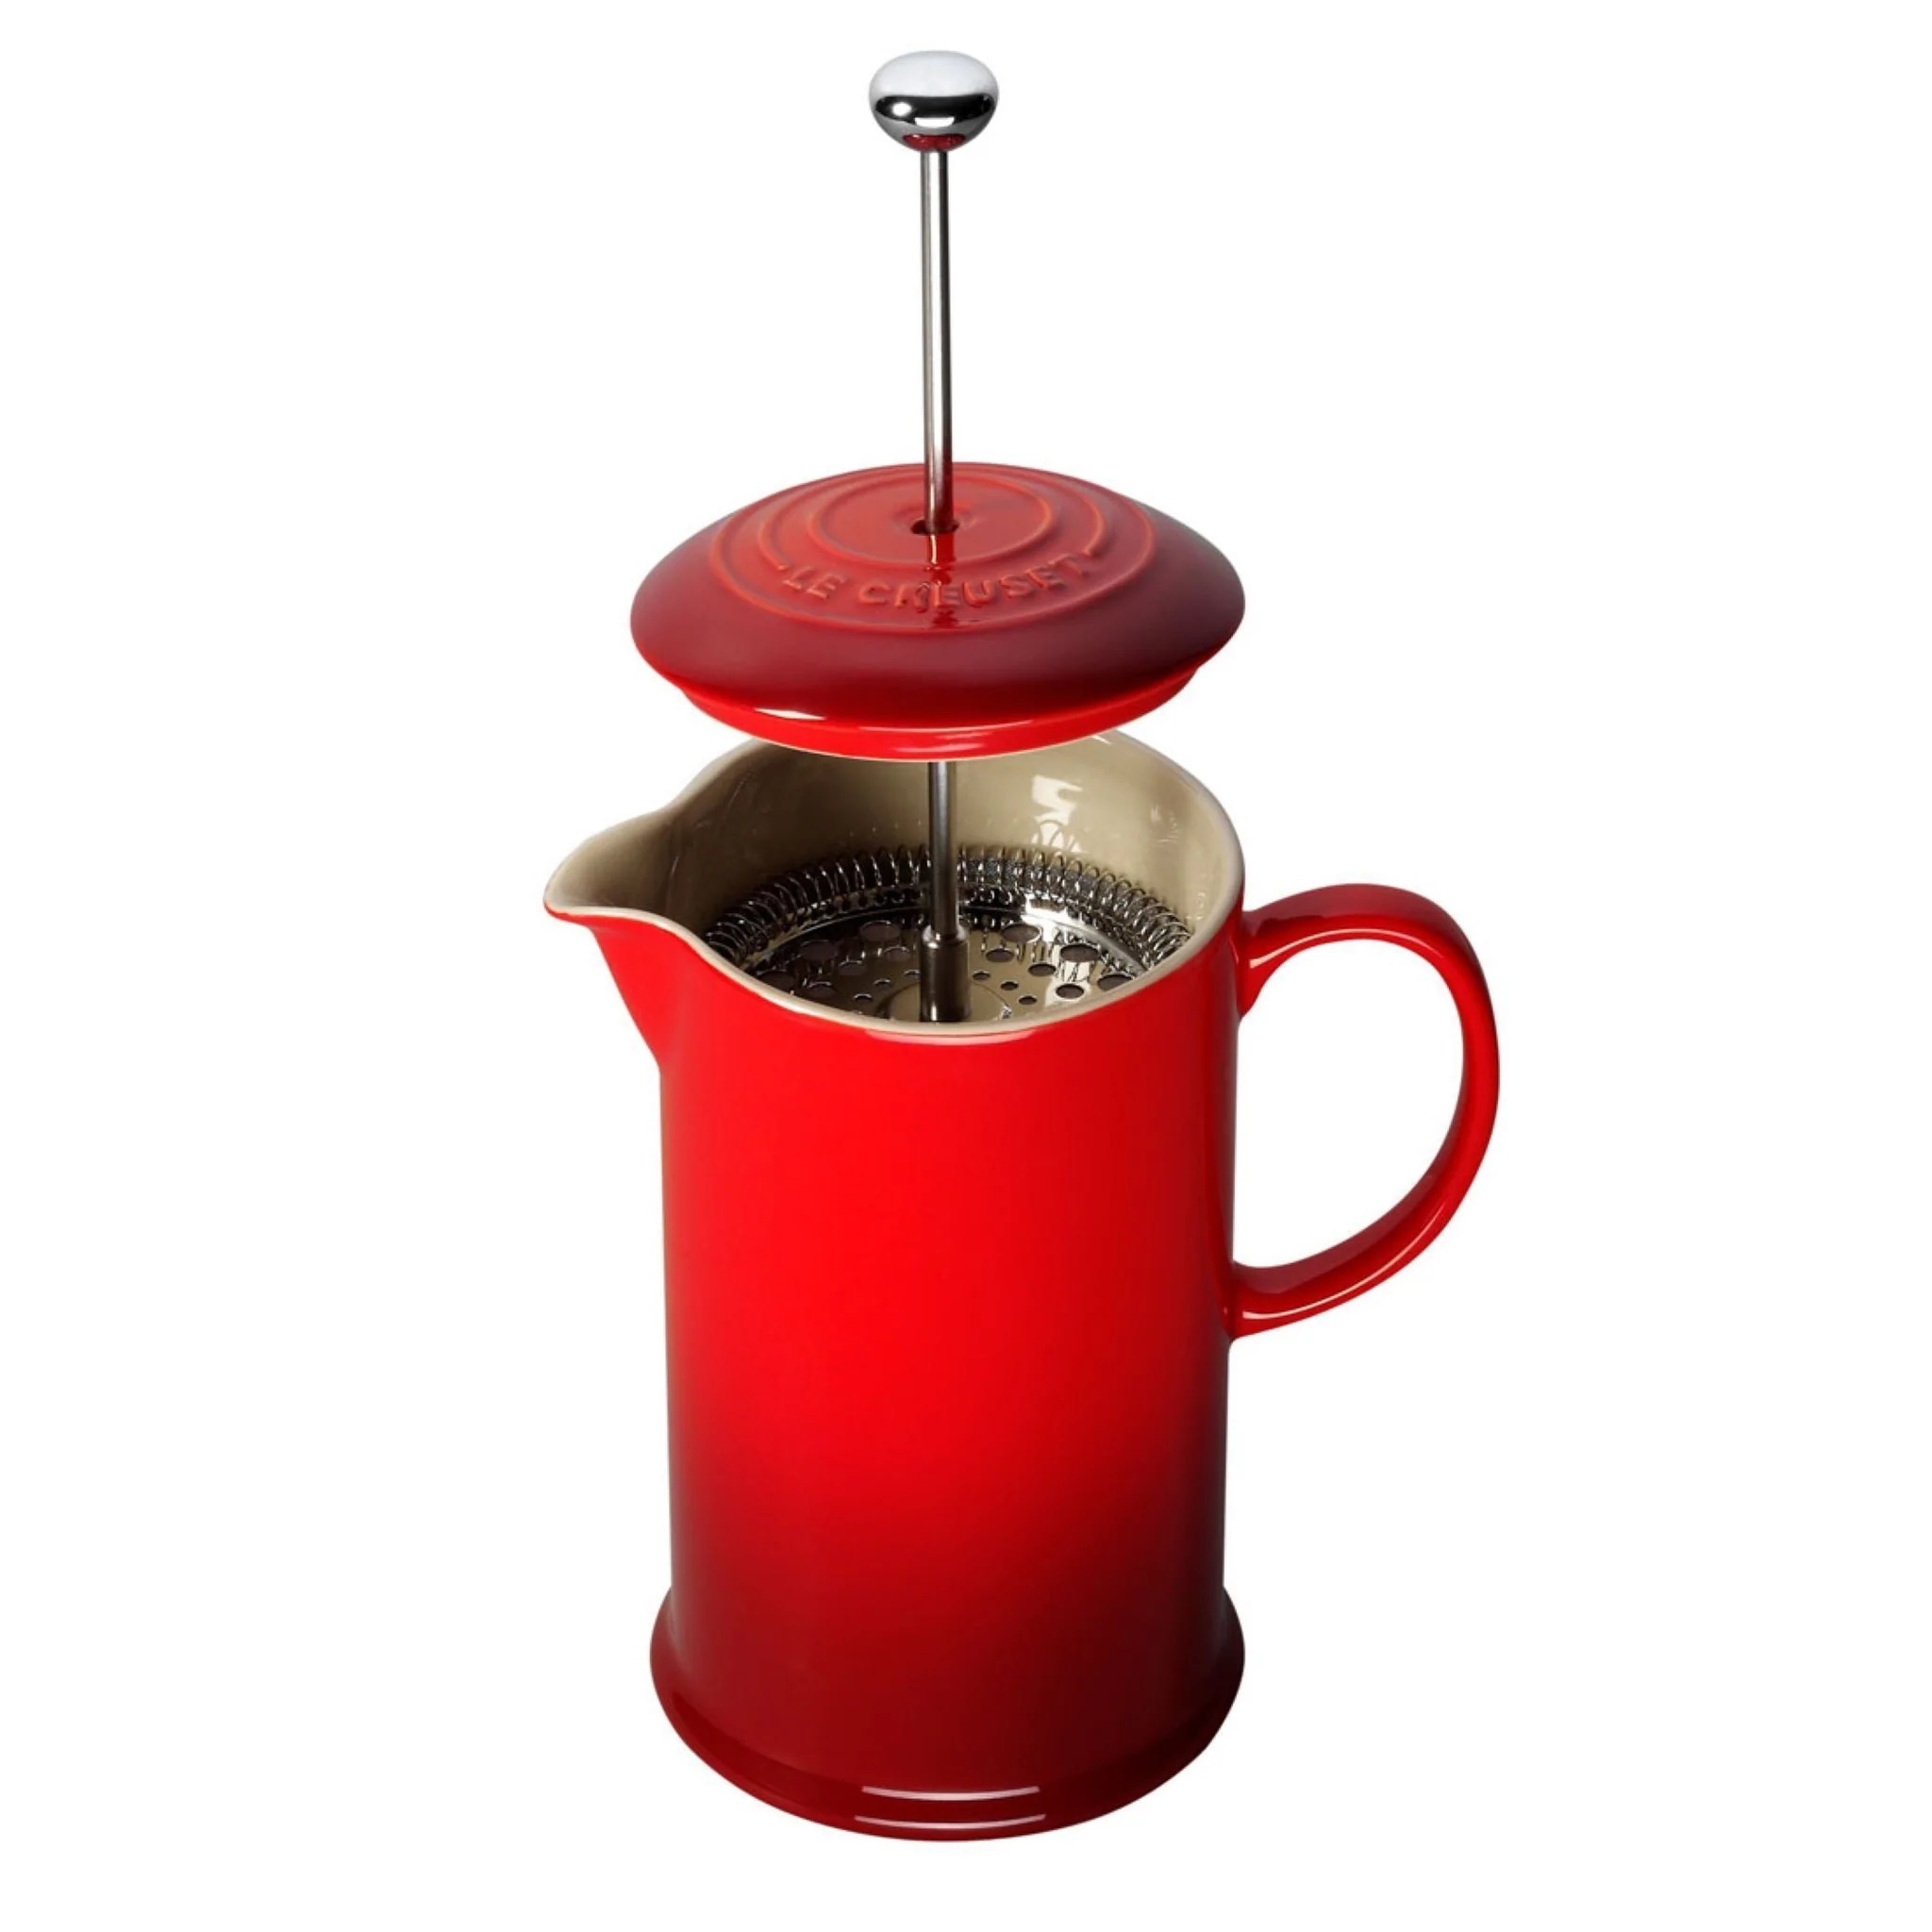 Le Creuset Coffee Reader red